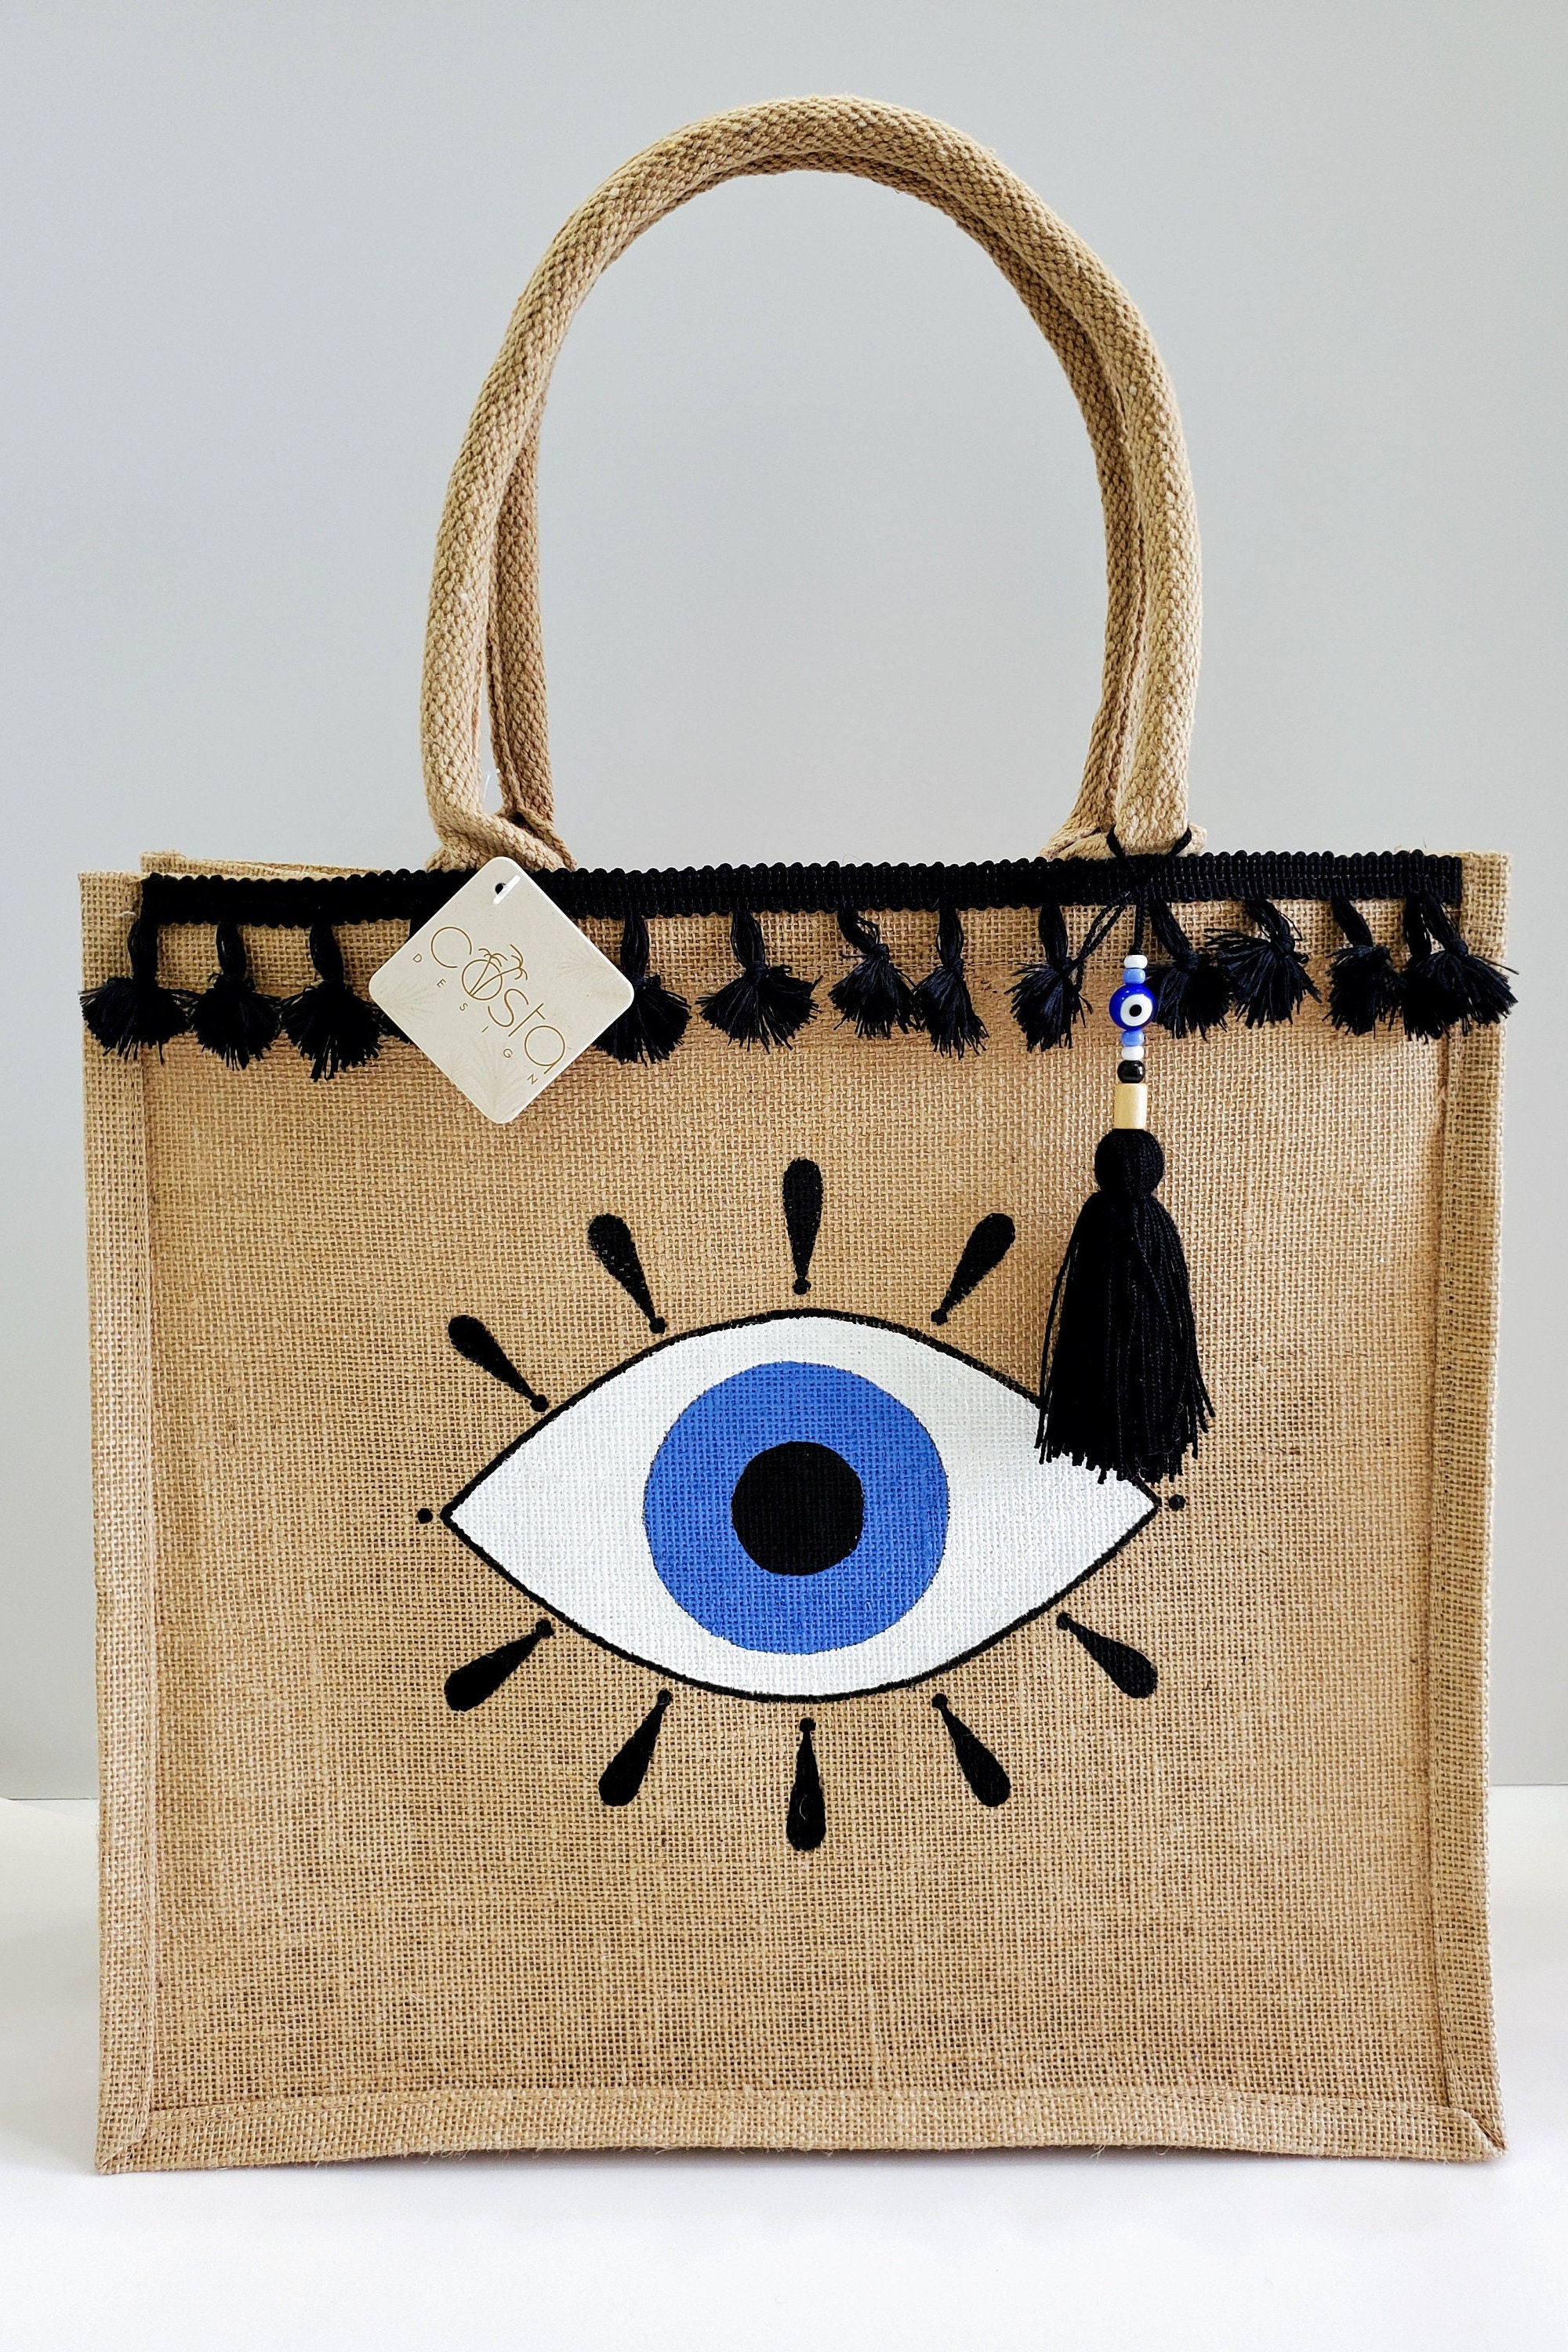 Evil Eye Hanging Beads in Blue and Gold Tote Bag for Sale by HotHibiscus